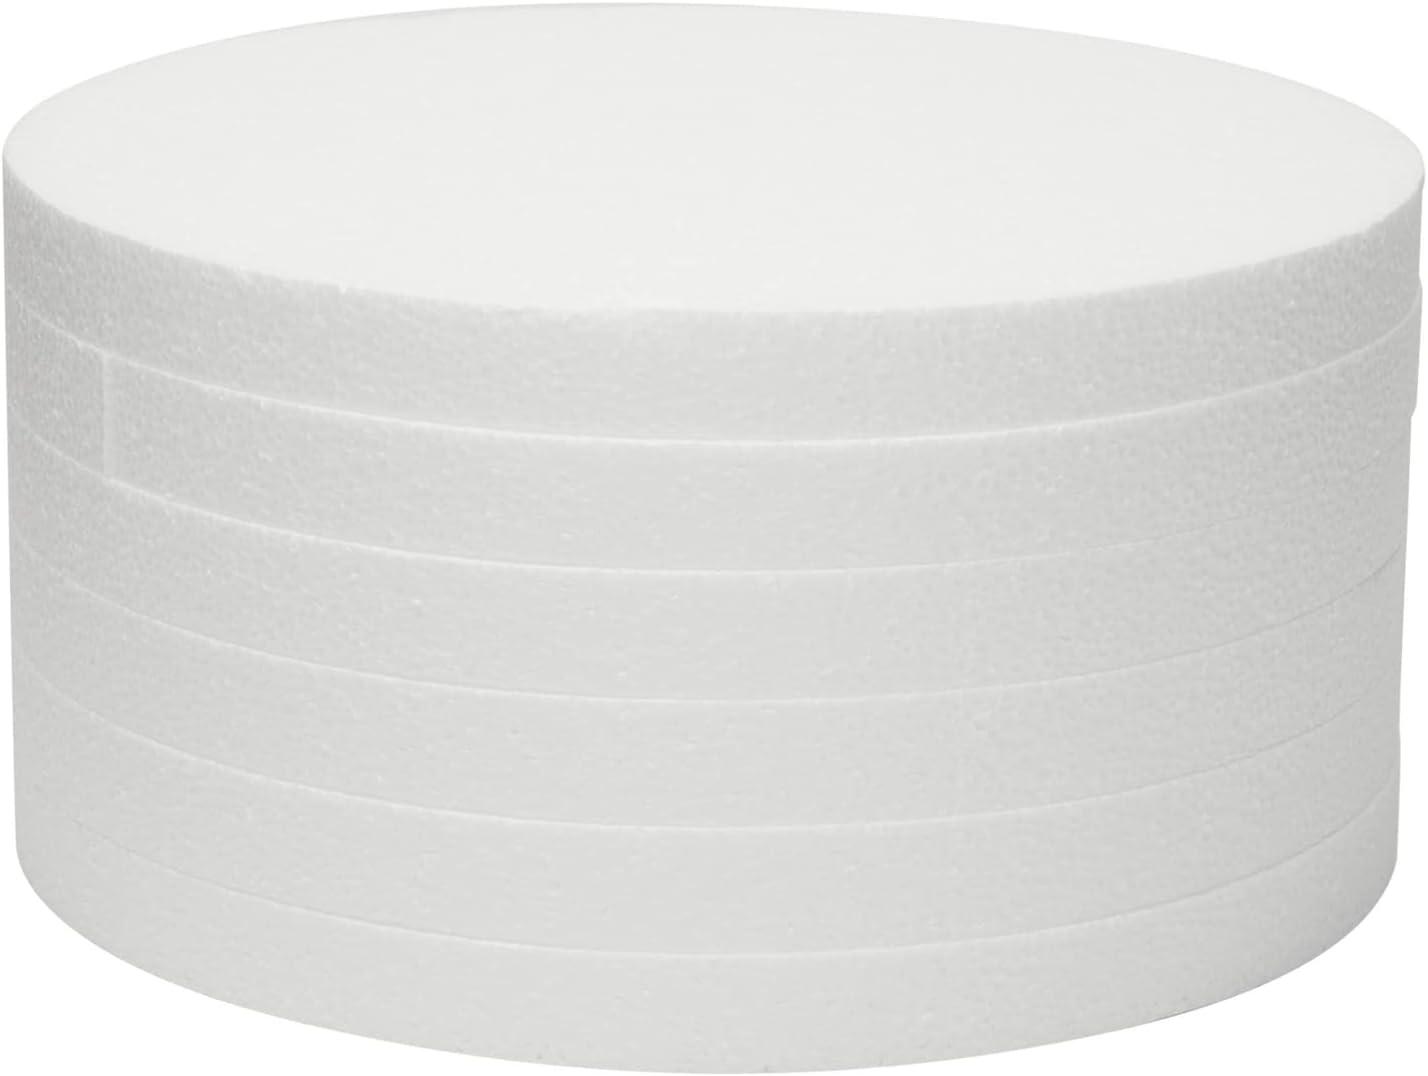 Foam Circles for Crafts, Round Polystyrene Disc for DIY Projects (24 Pack,  3 x